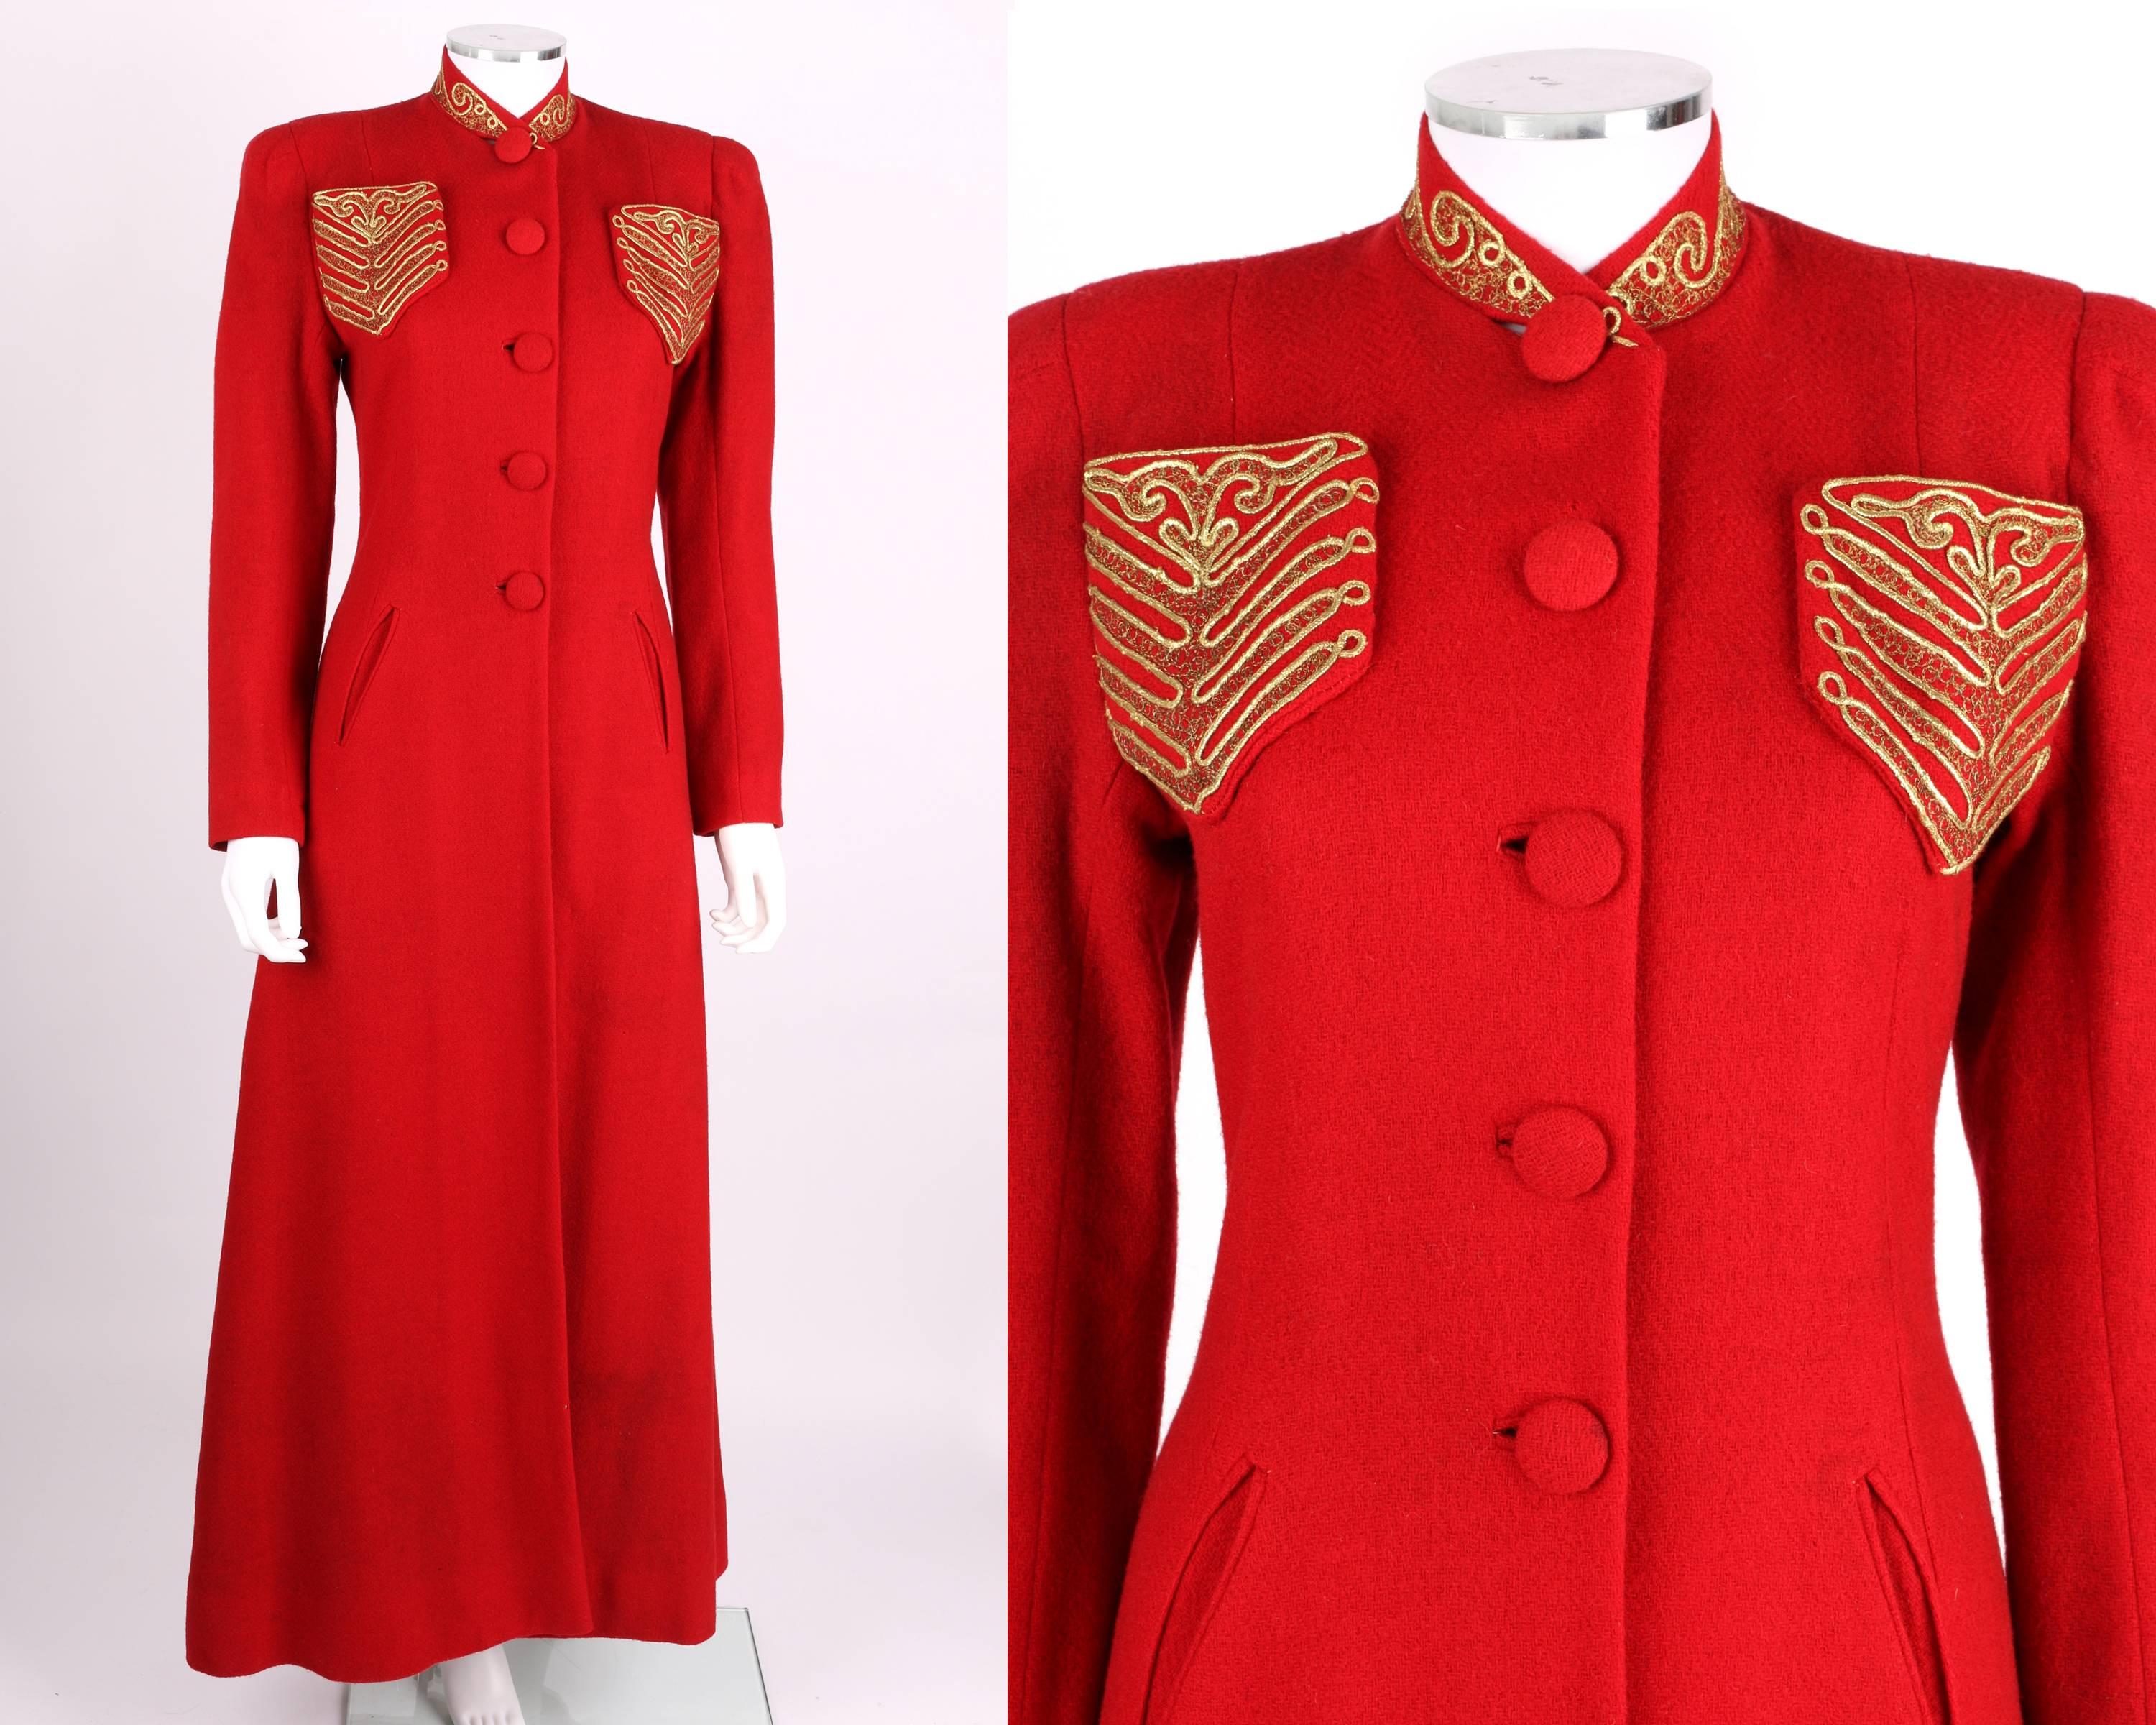 Striking circa 1939 red wool princess cut evening coat purchased at Chas. A. Stevens & Co. Attributes of Elsa Schiaparelli's work. High collar and two small chest pockets are embellished with gold metallic cording and embroidery. Two slant pockets